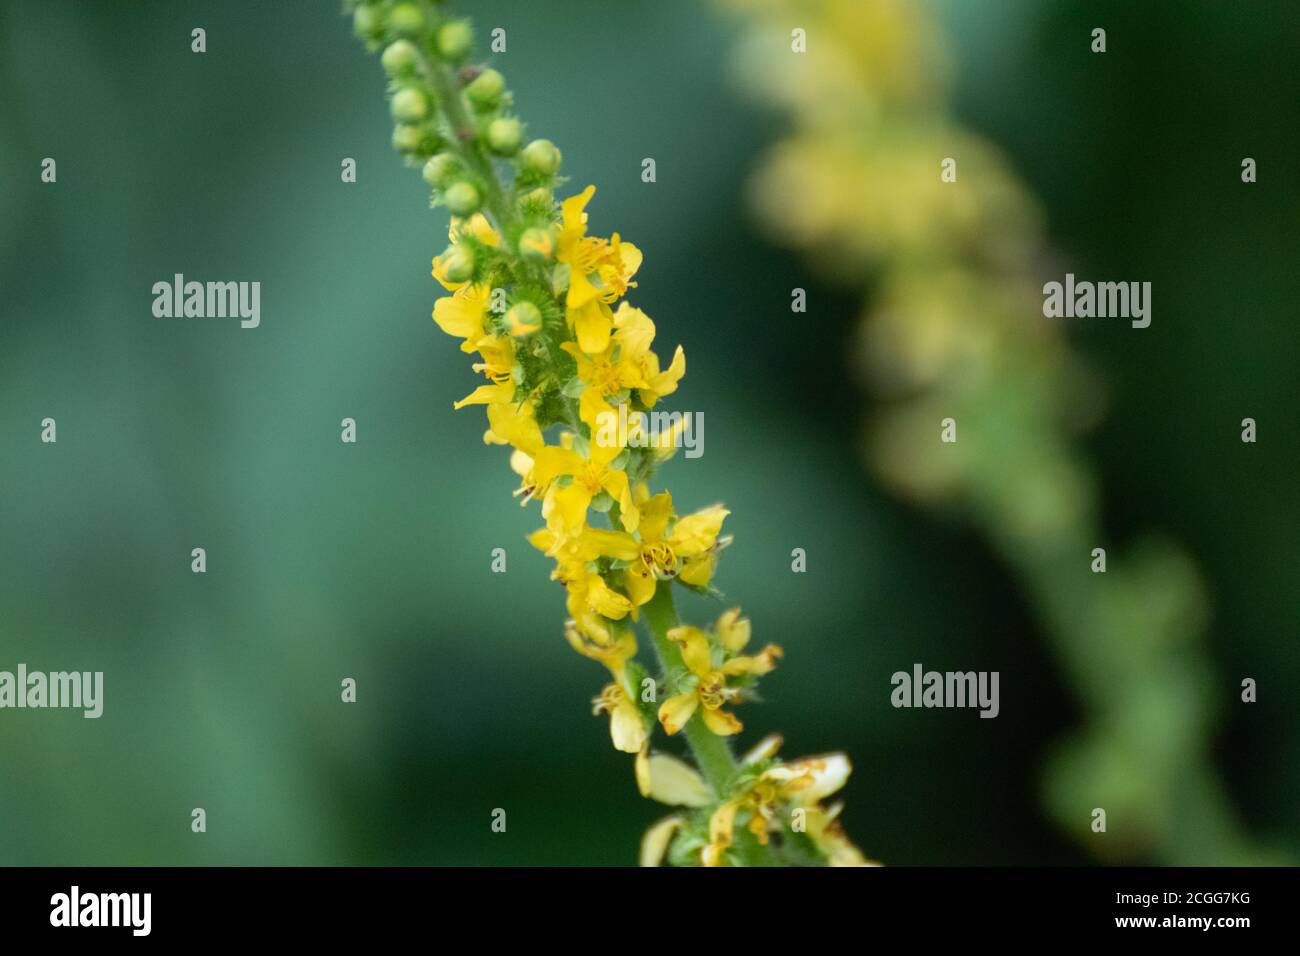 Agrimony yellow tall stem medicinal herb flowers macro. Wild summer meadow grass close-up on blurred dark green lawn natural background Stock Photo